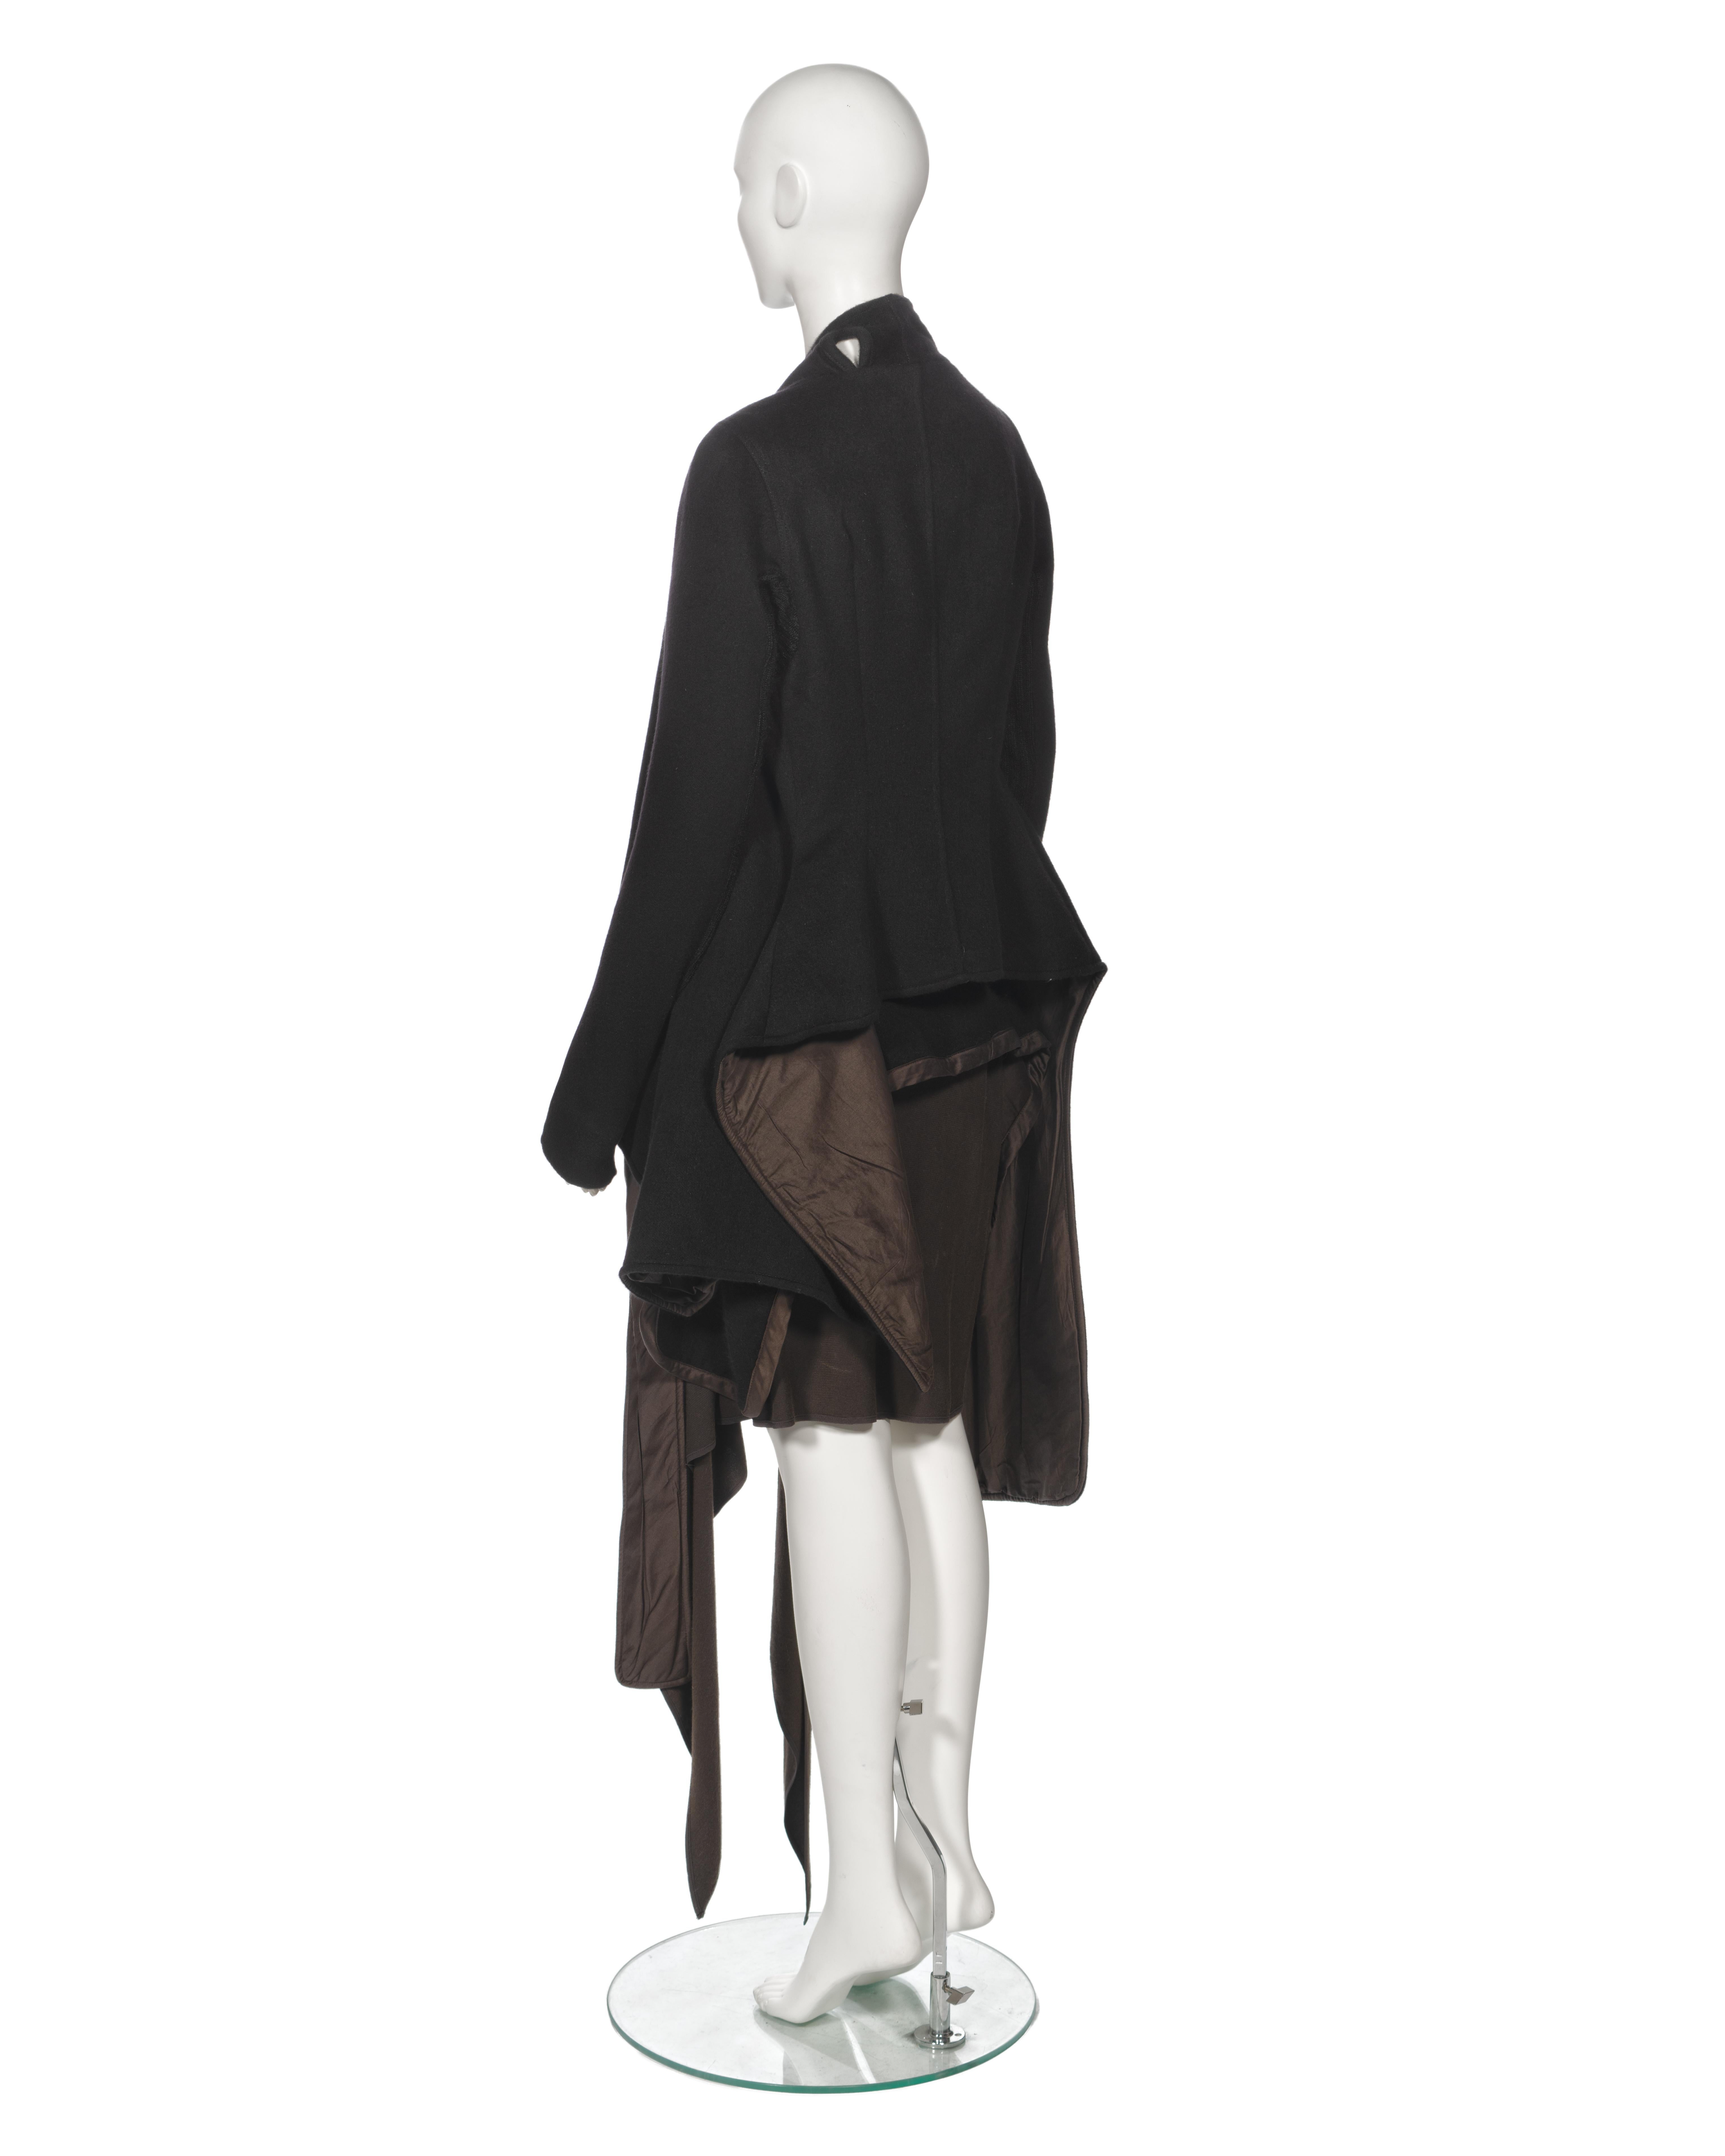 Rick Owens Angora Jacket and Cashmere Skirt 'Queen' Ensemble, fw 2004 For Sale 8